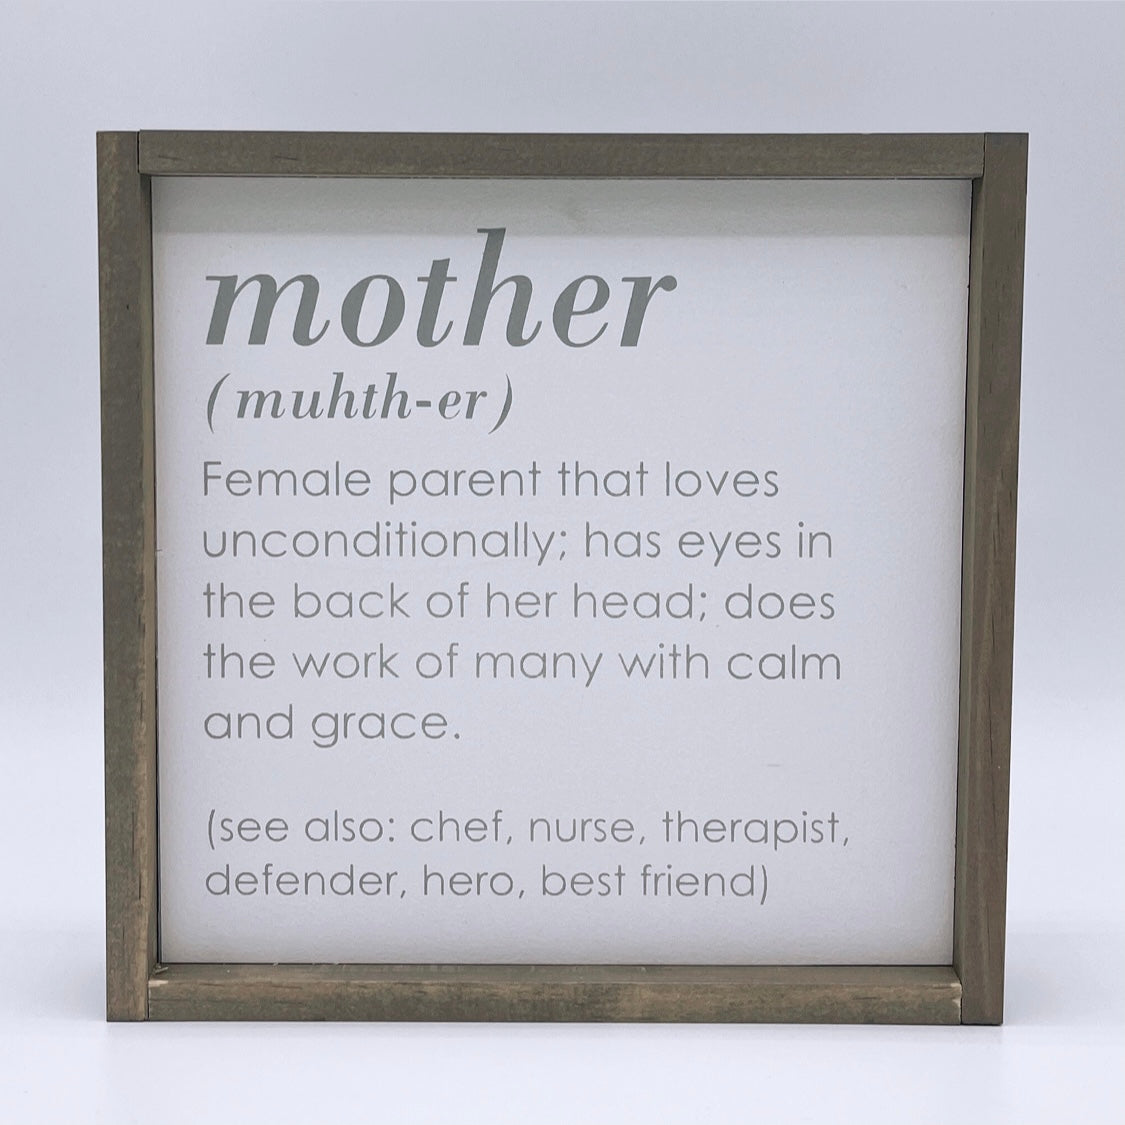 Mother: definition